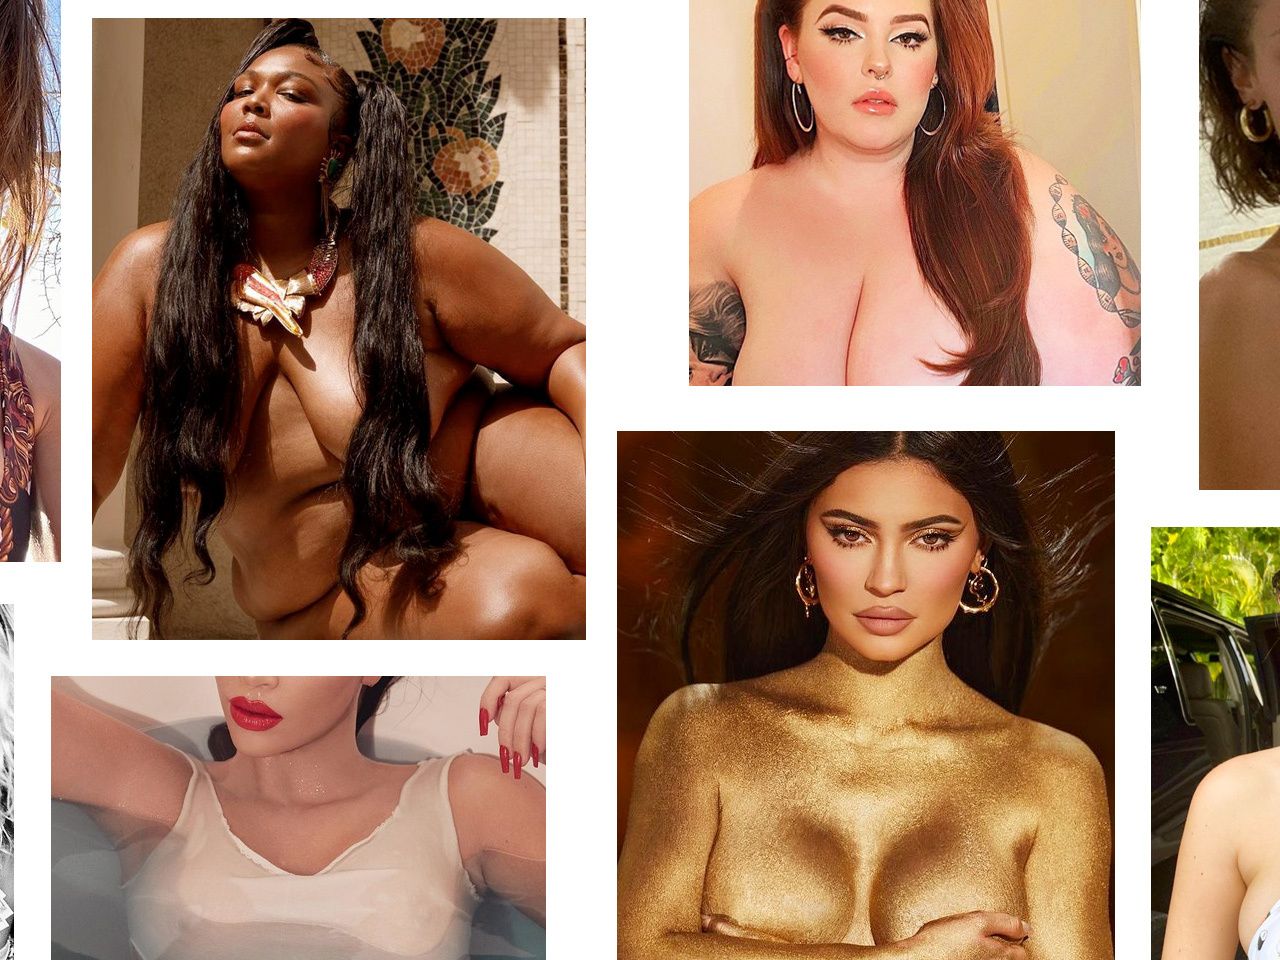 armelito sayson recommends women showing off their boobs pic